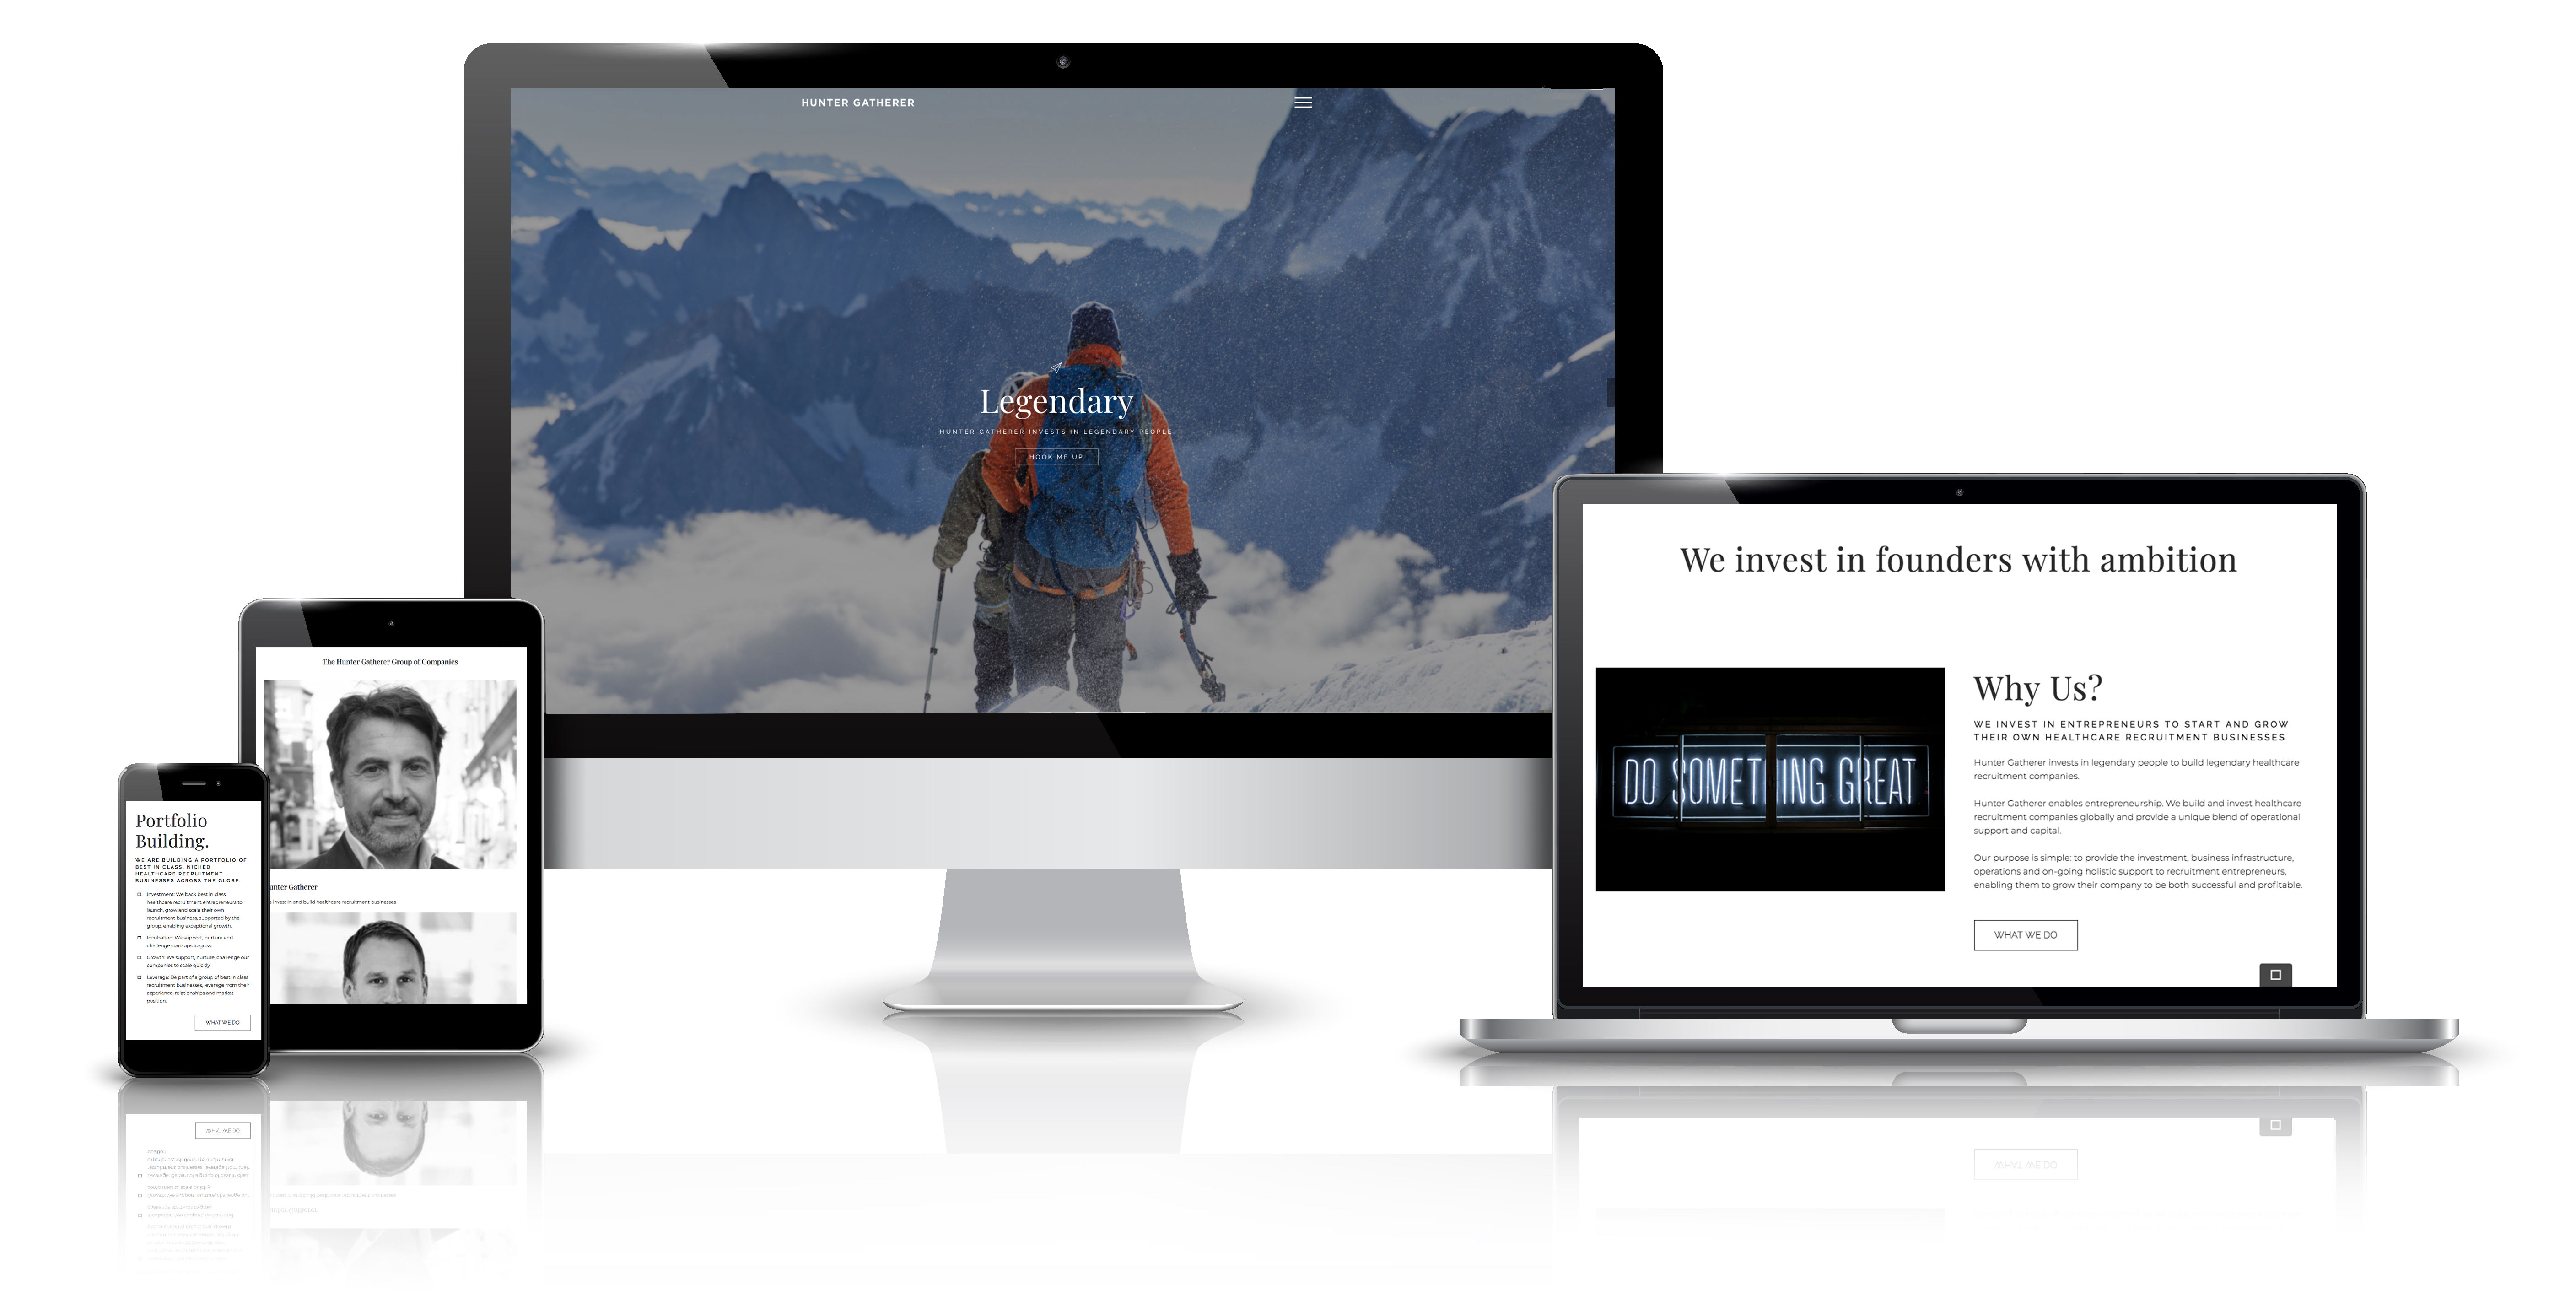 Website redesign by Riley & Thomas